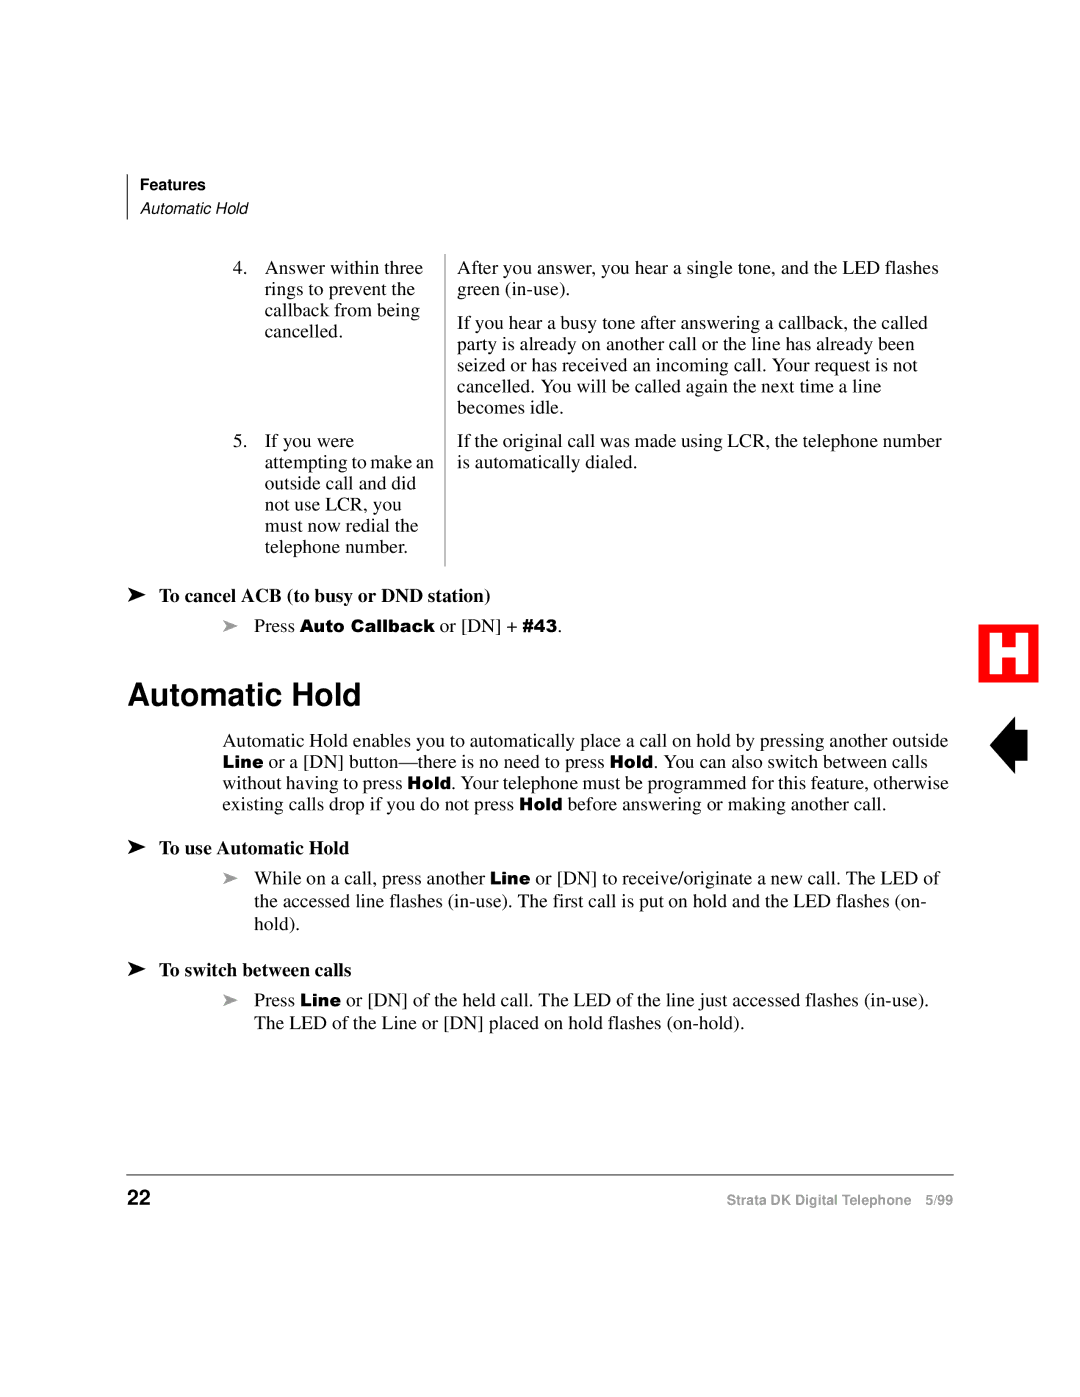 Toshiba Digital Telephone manual To cancel ACB to busy or DND station, To use Automatic Hold, To switch between calls 